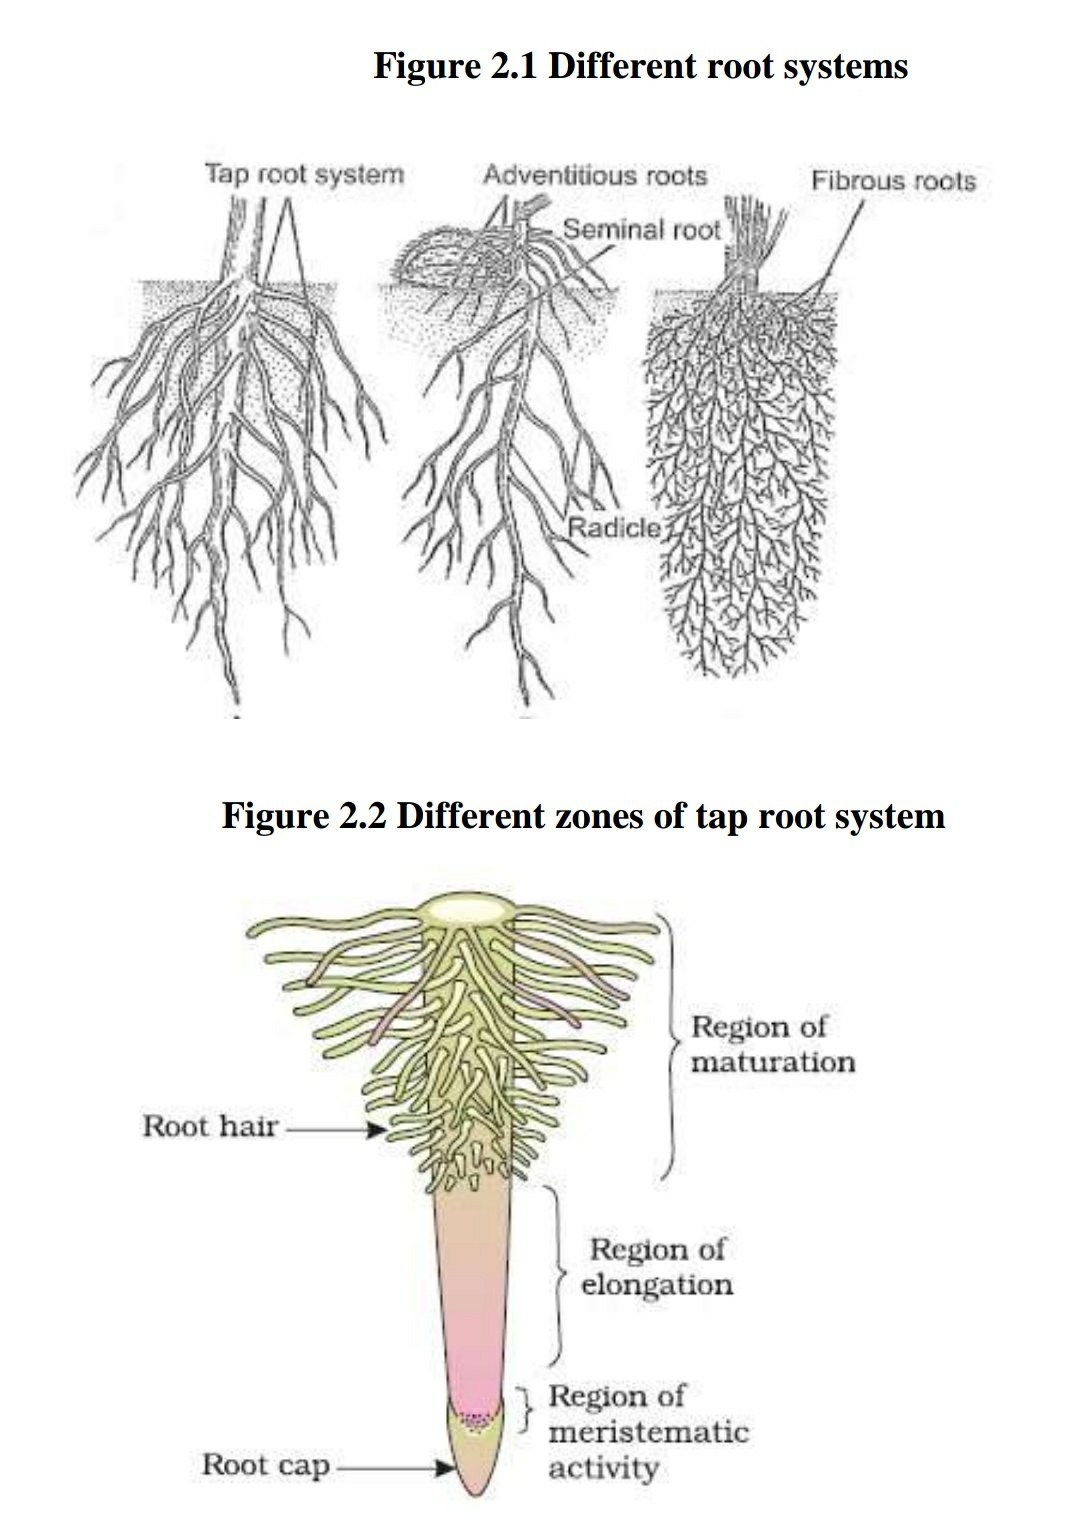 Different root systems